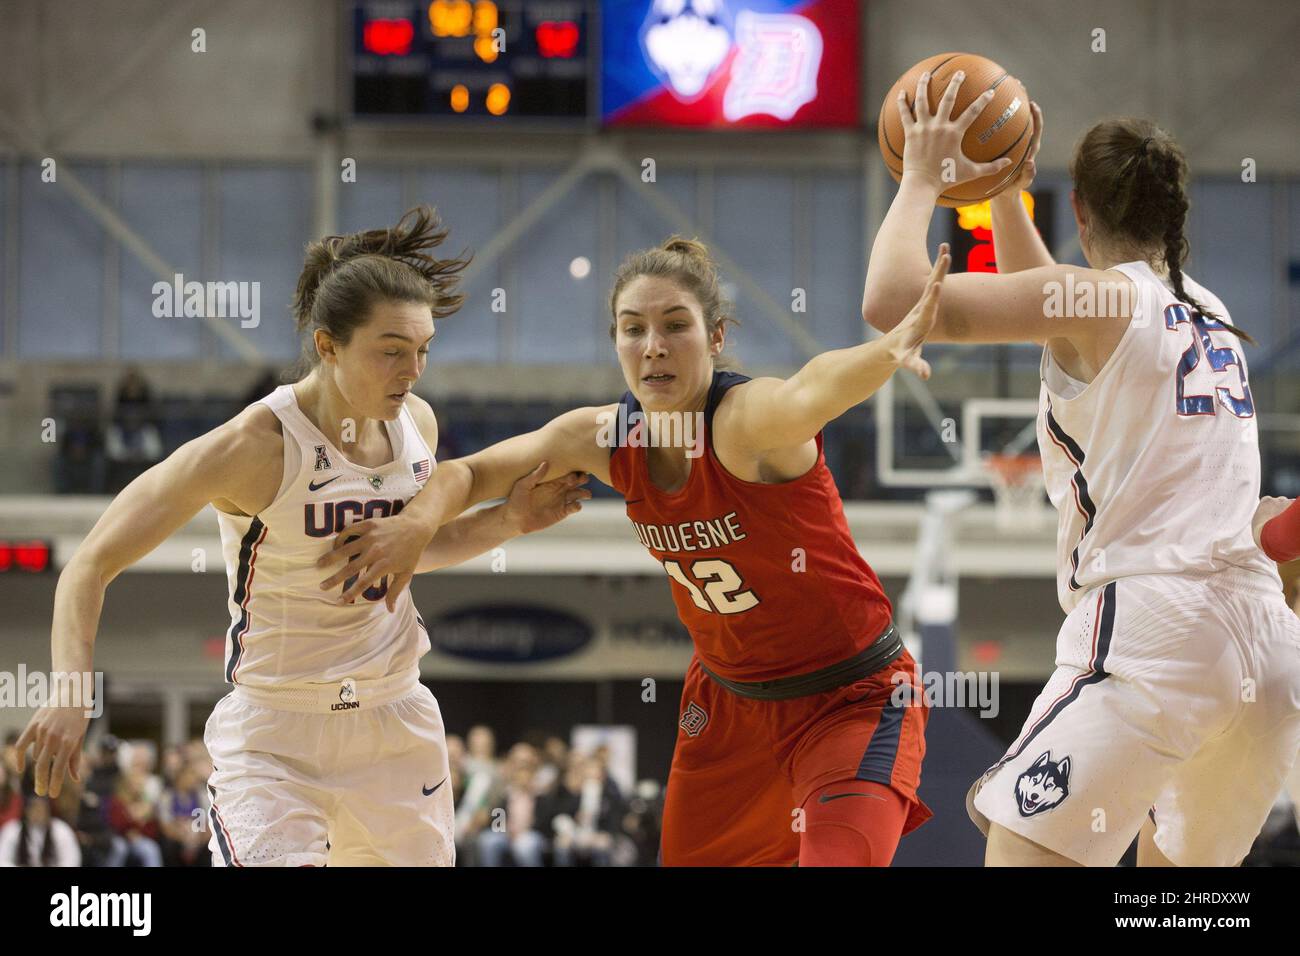 Duquesne Lady Dukes' Anie-Pier Samson, centre, of Saint-Bruno, Que., offers  defence as she takes on Connecticut Huskies' Molly Bent and teammate Kyla  Irwin, right, during second half women's basketball action in Toronto